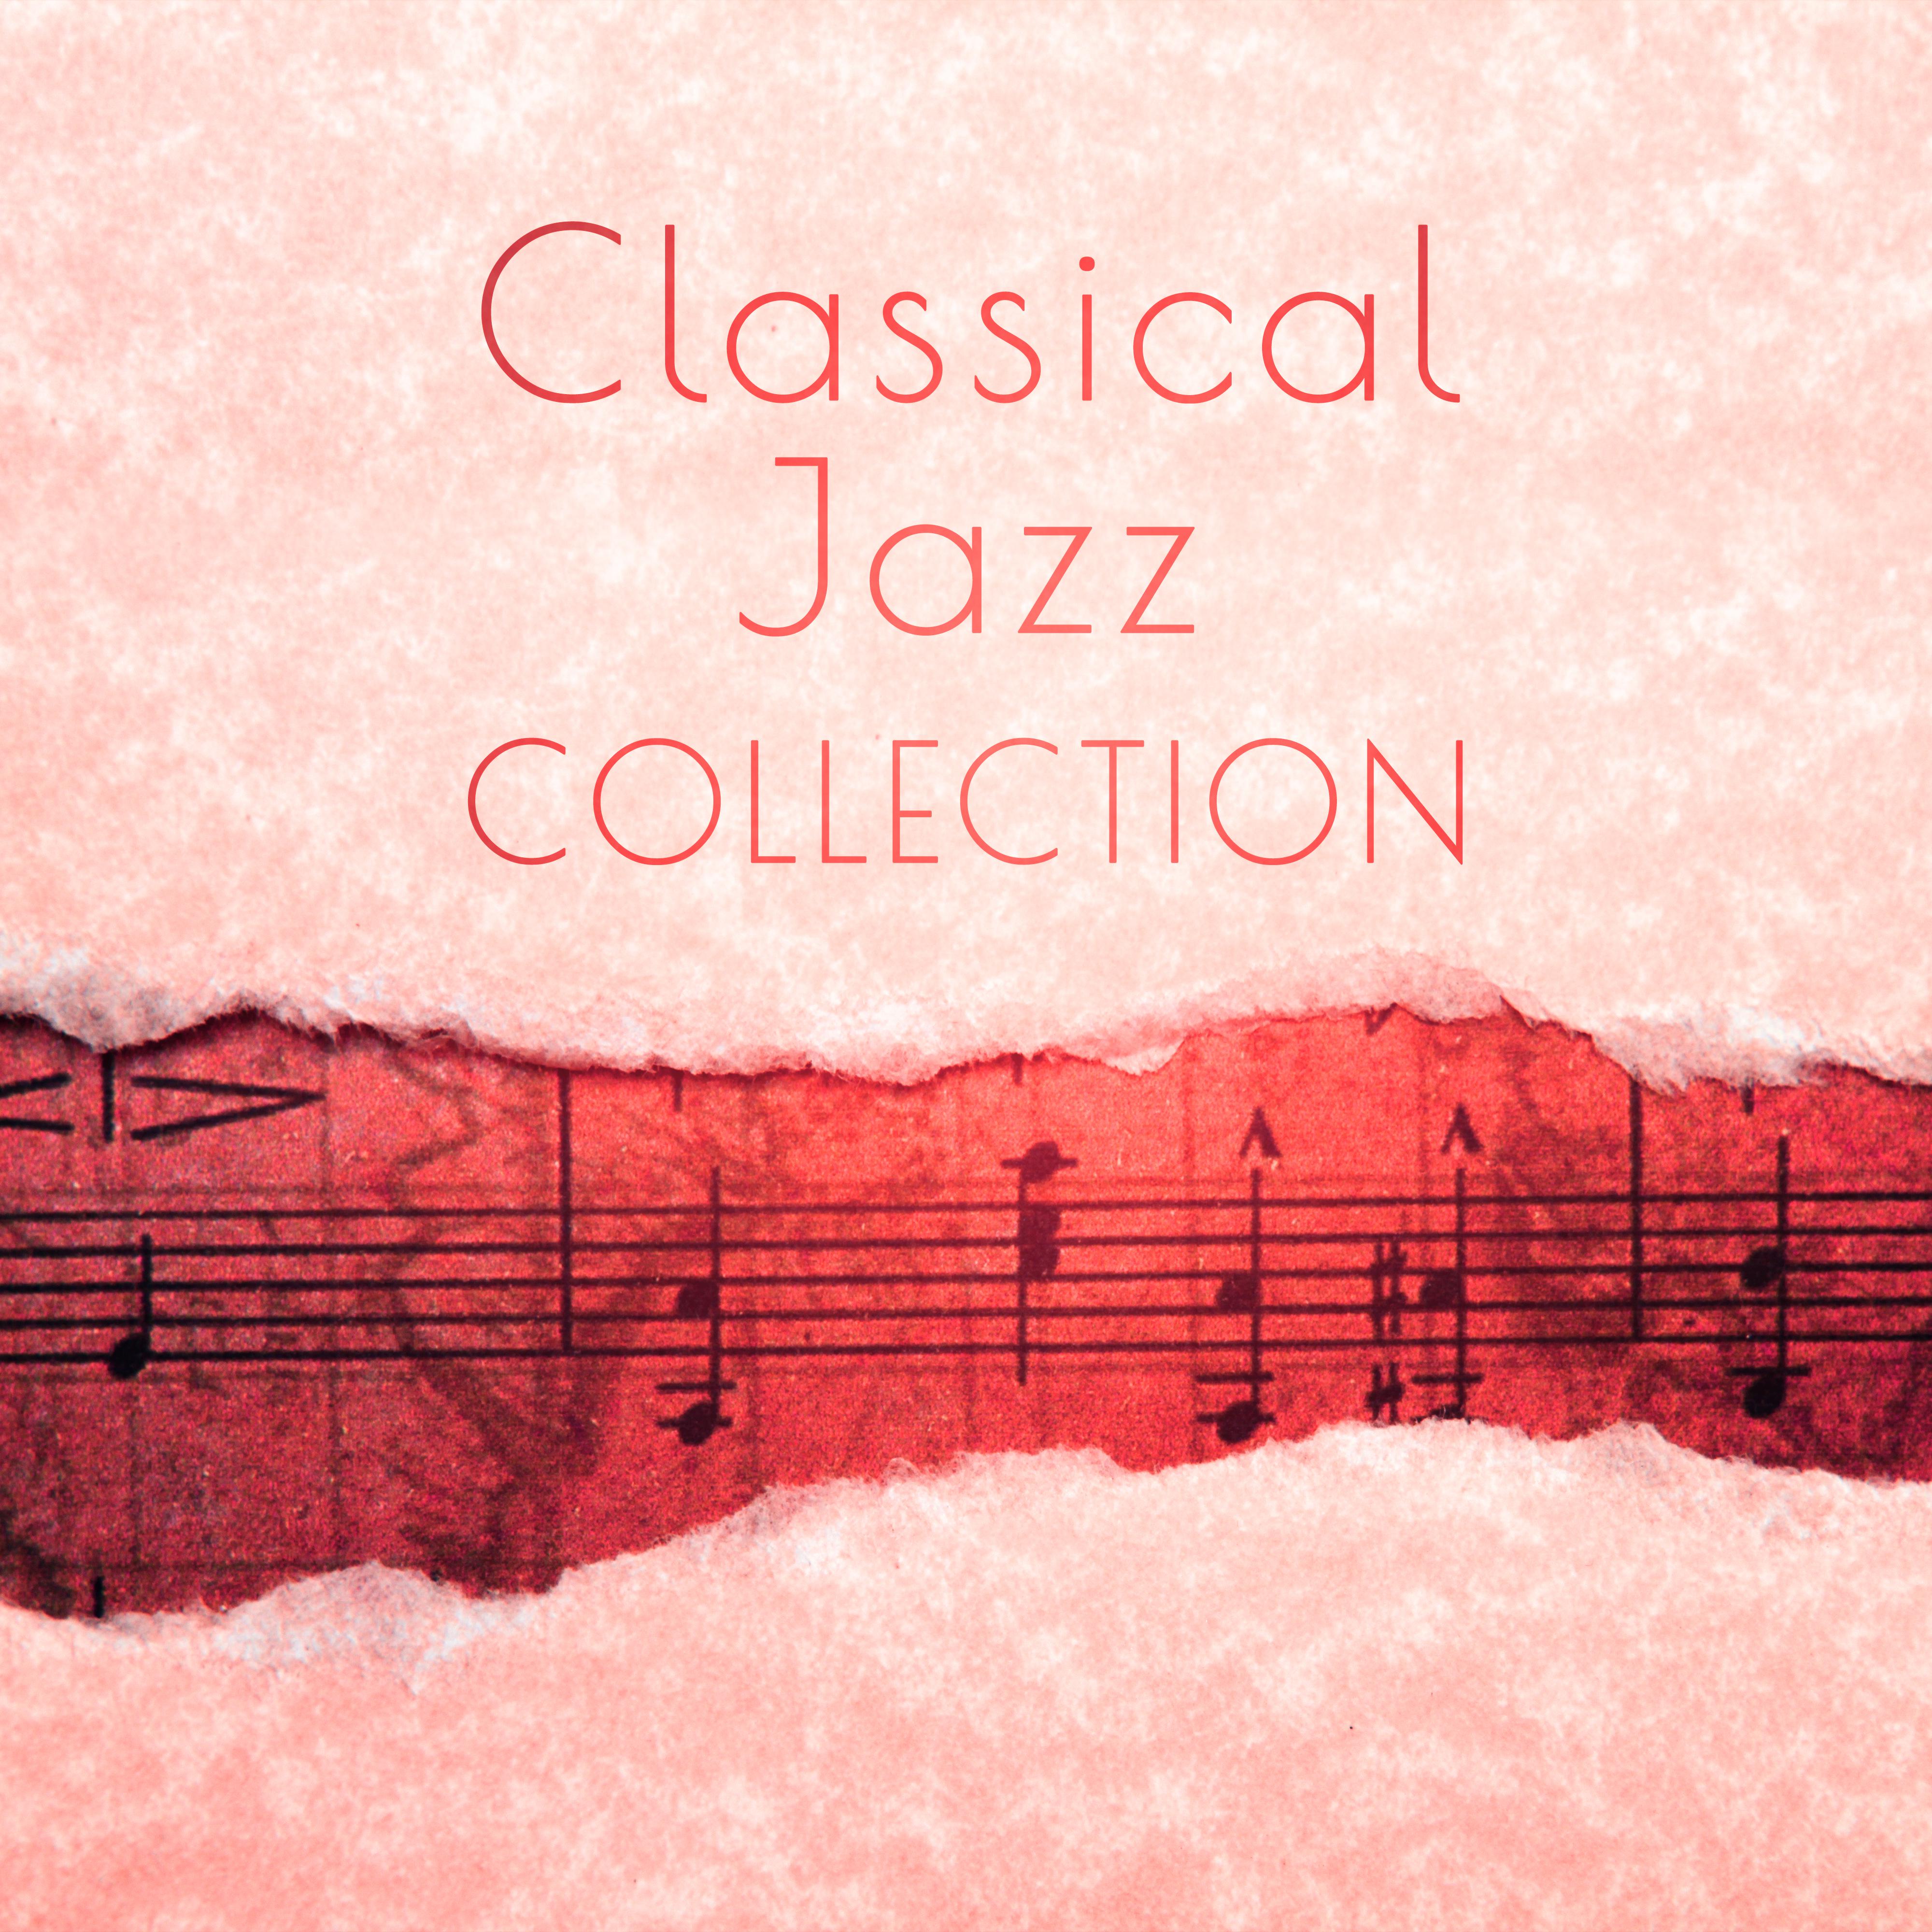 Classical Jazz Collection – Smooth Jazz, Instrumental Piano for Jazz Bar, Gentle Jazz Music, Classical Jazz Piano